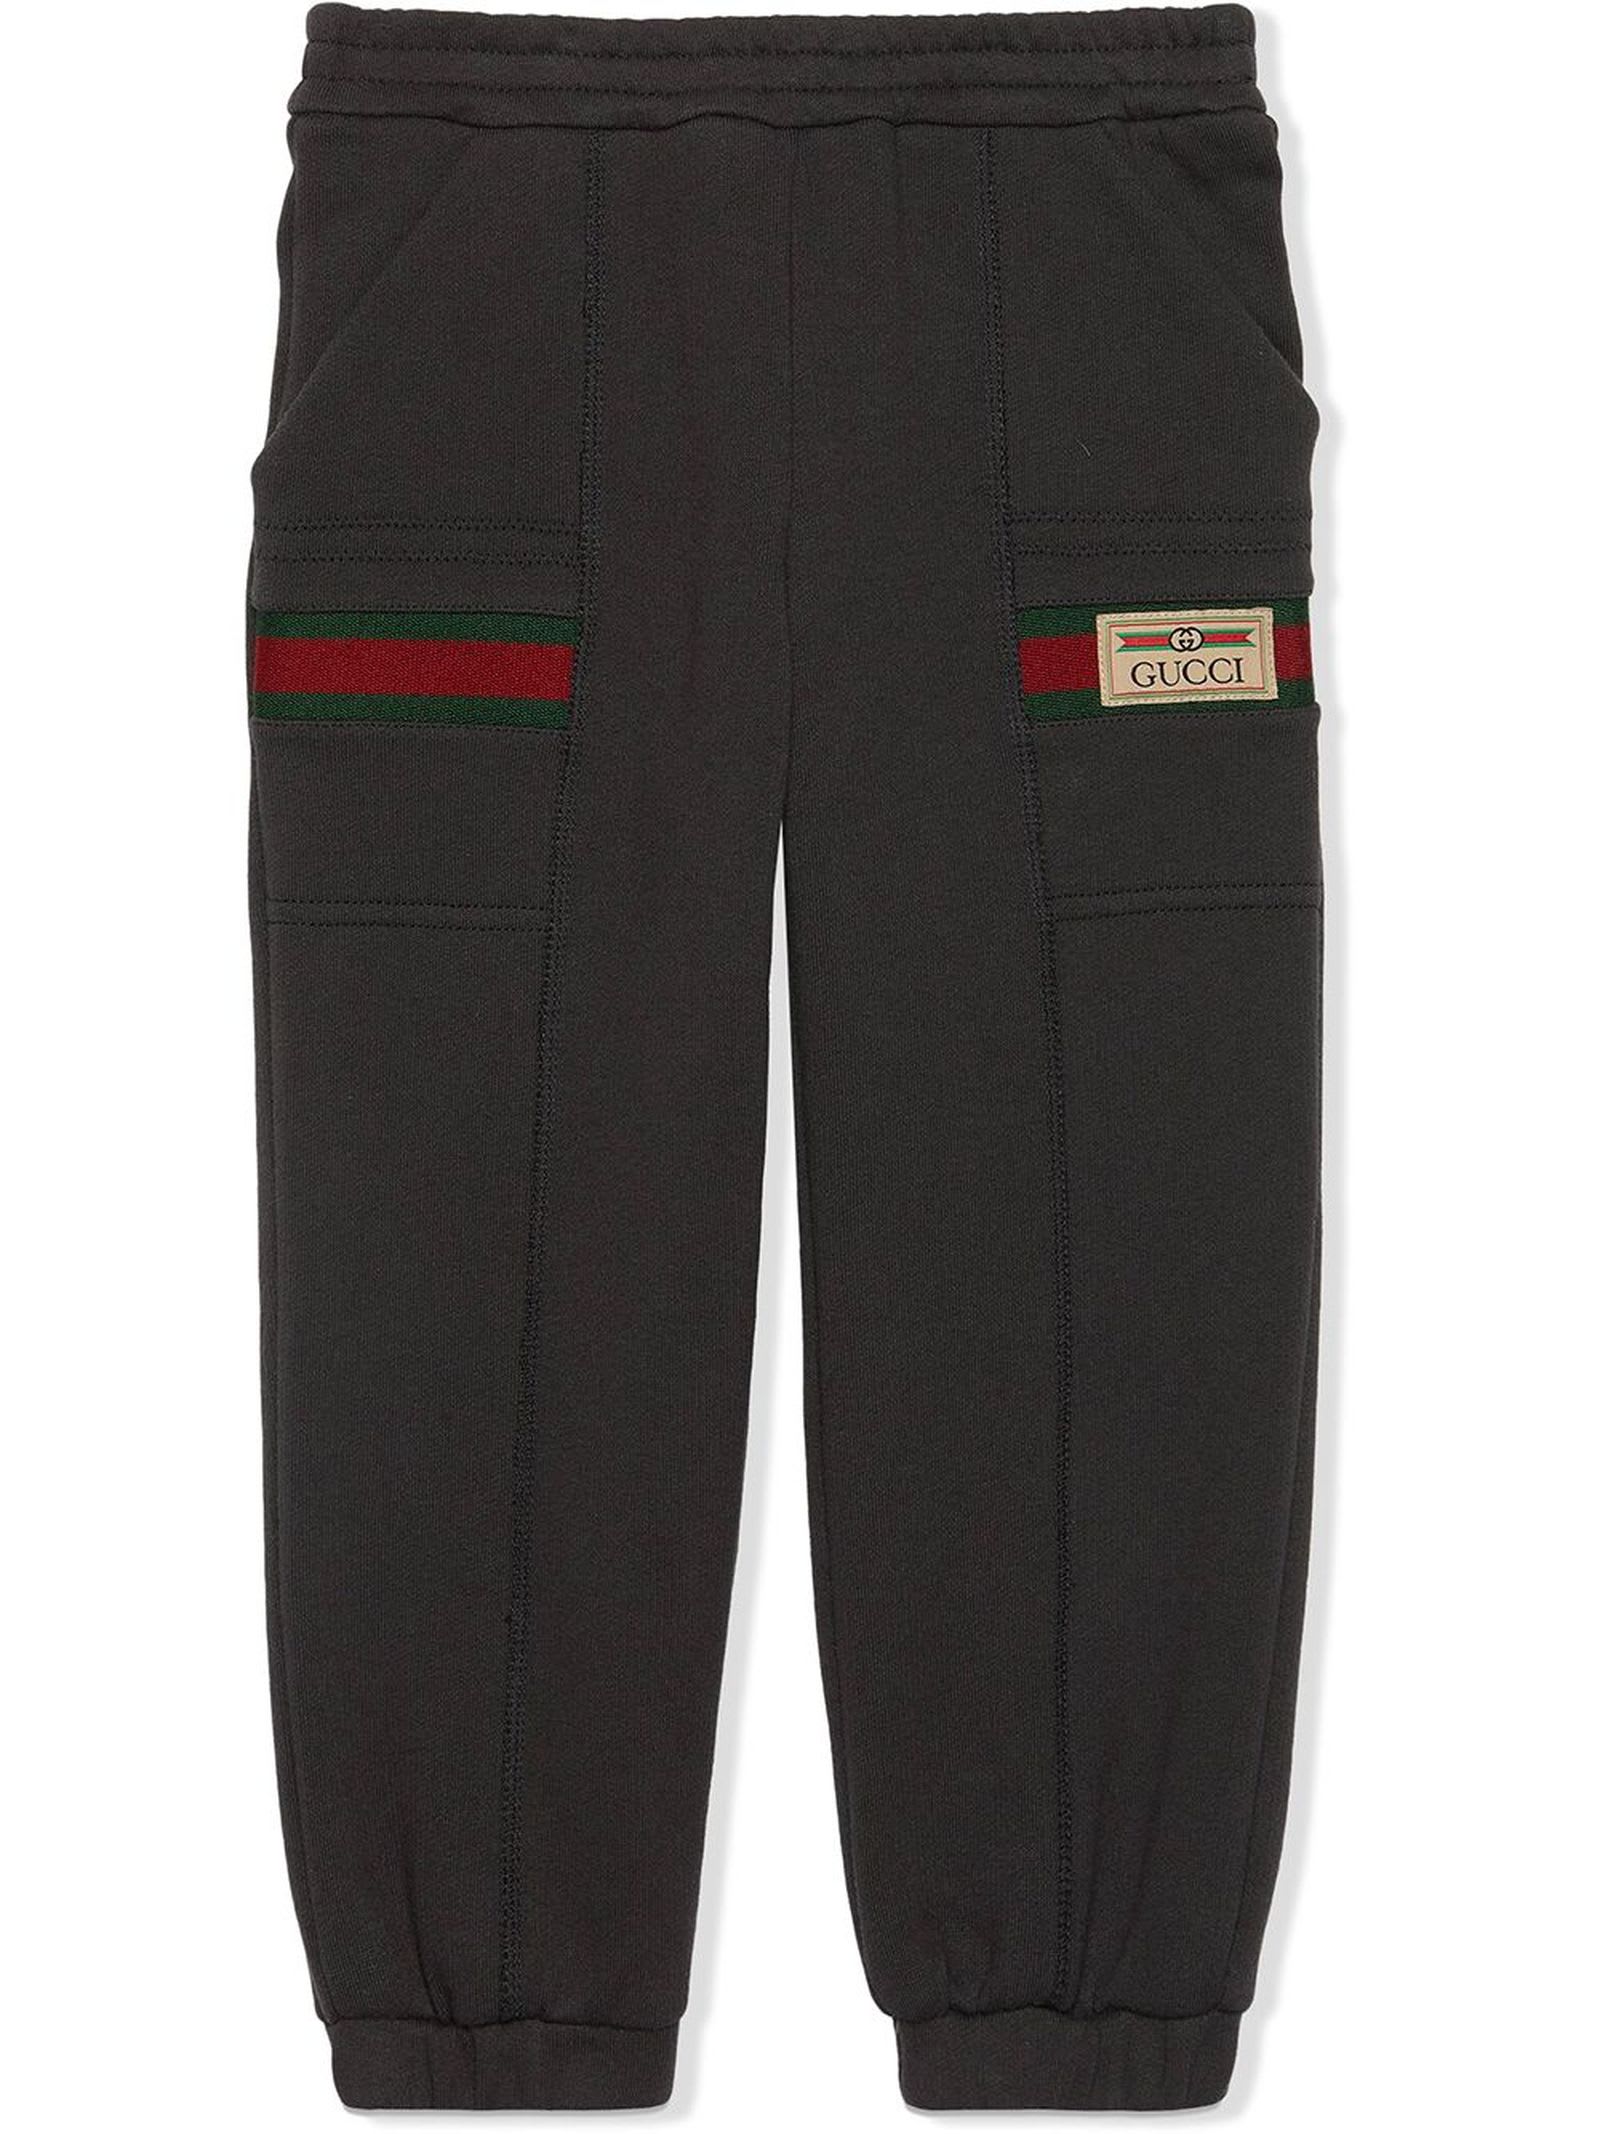 Gucci Childrens Jogging Trousers